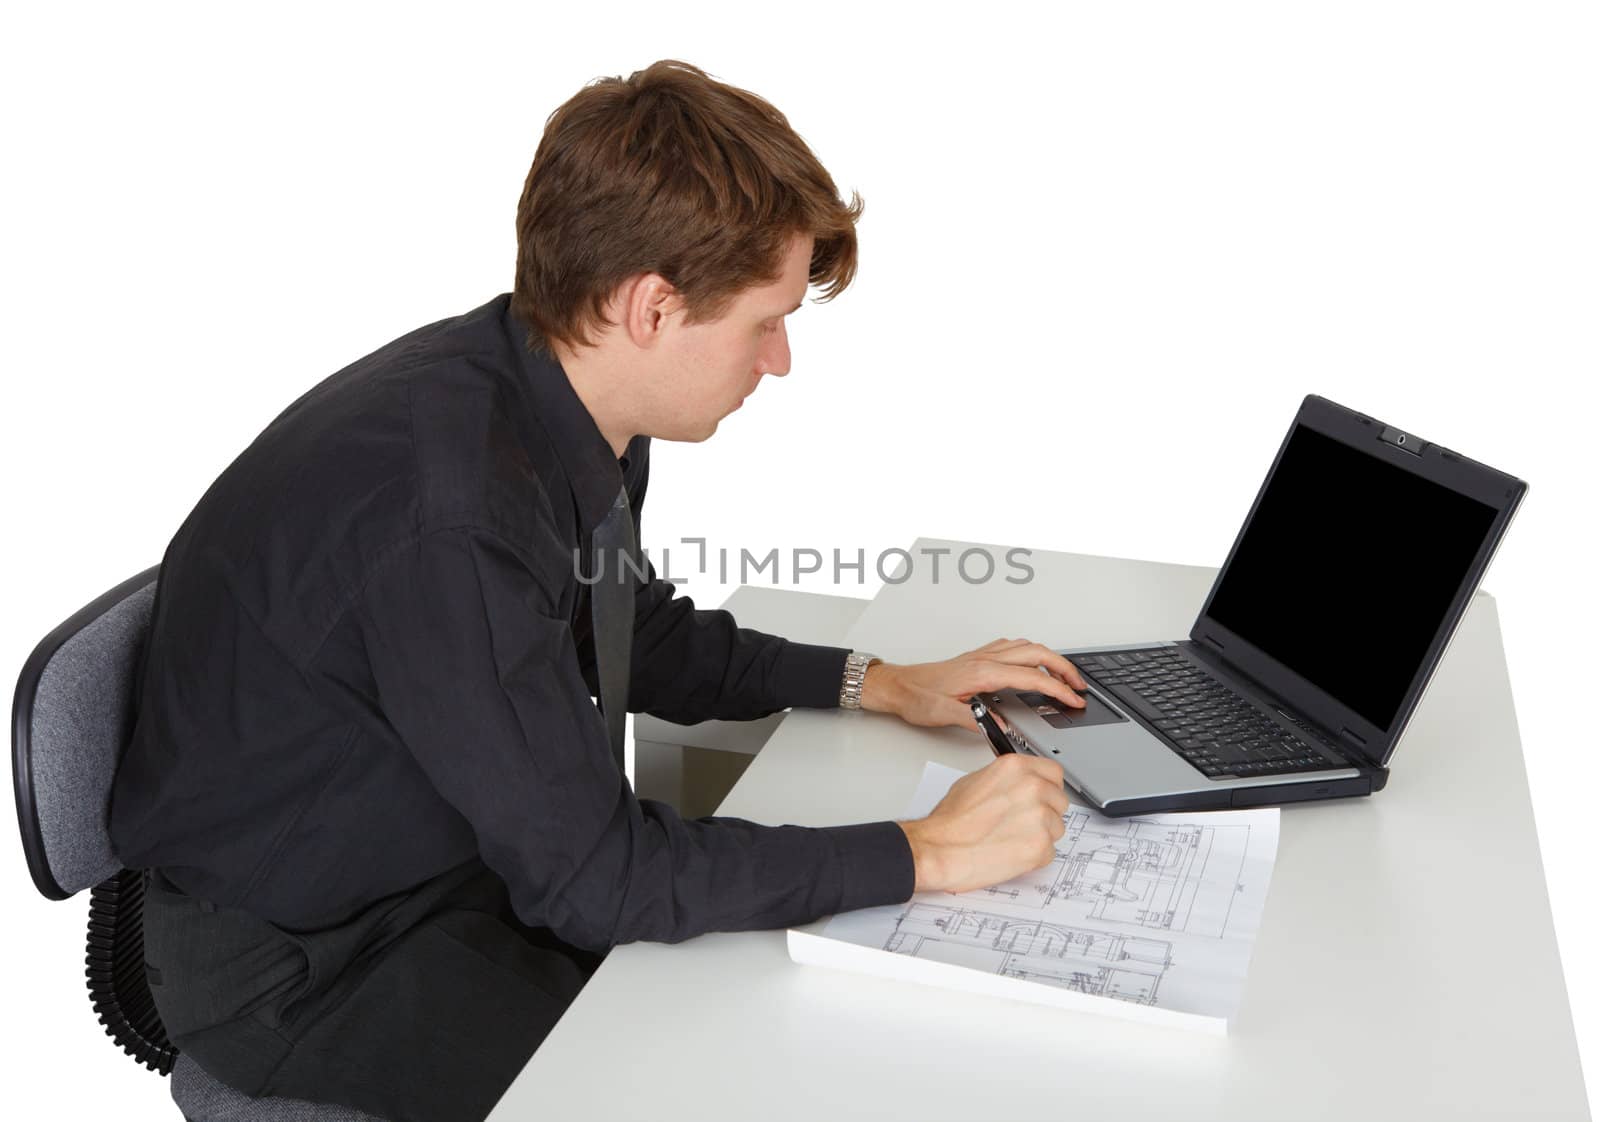 The young man is working while sitting at desk